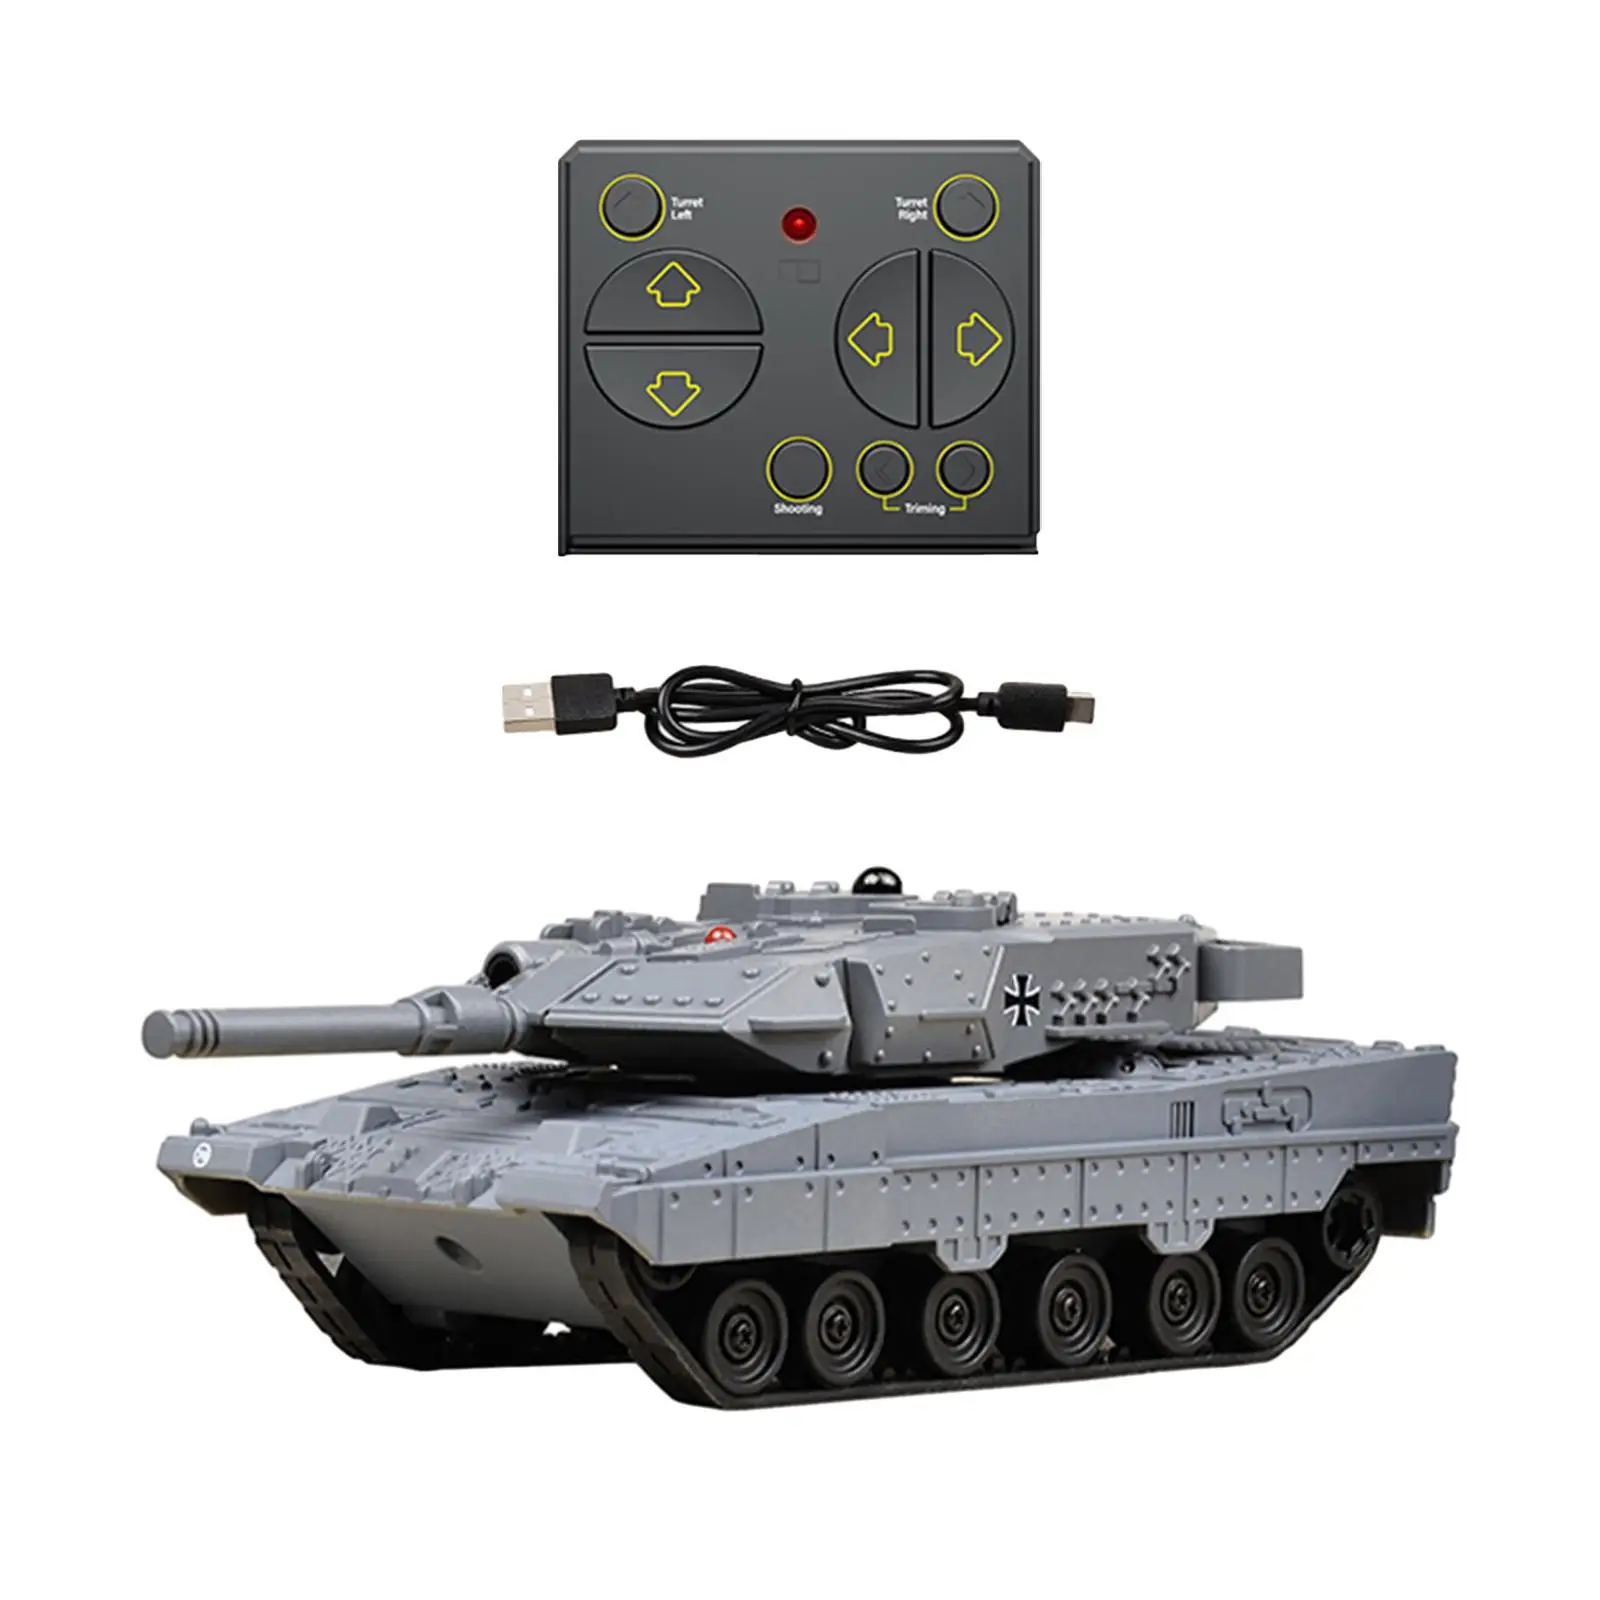 RC Battle Tank Durable Remote Control Tank Tank Model RC Vehicle Toys for Children 3 4 5 6 7 8 Years Boys Girls Birhtday Gift